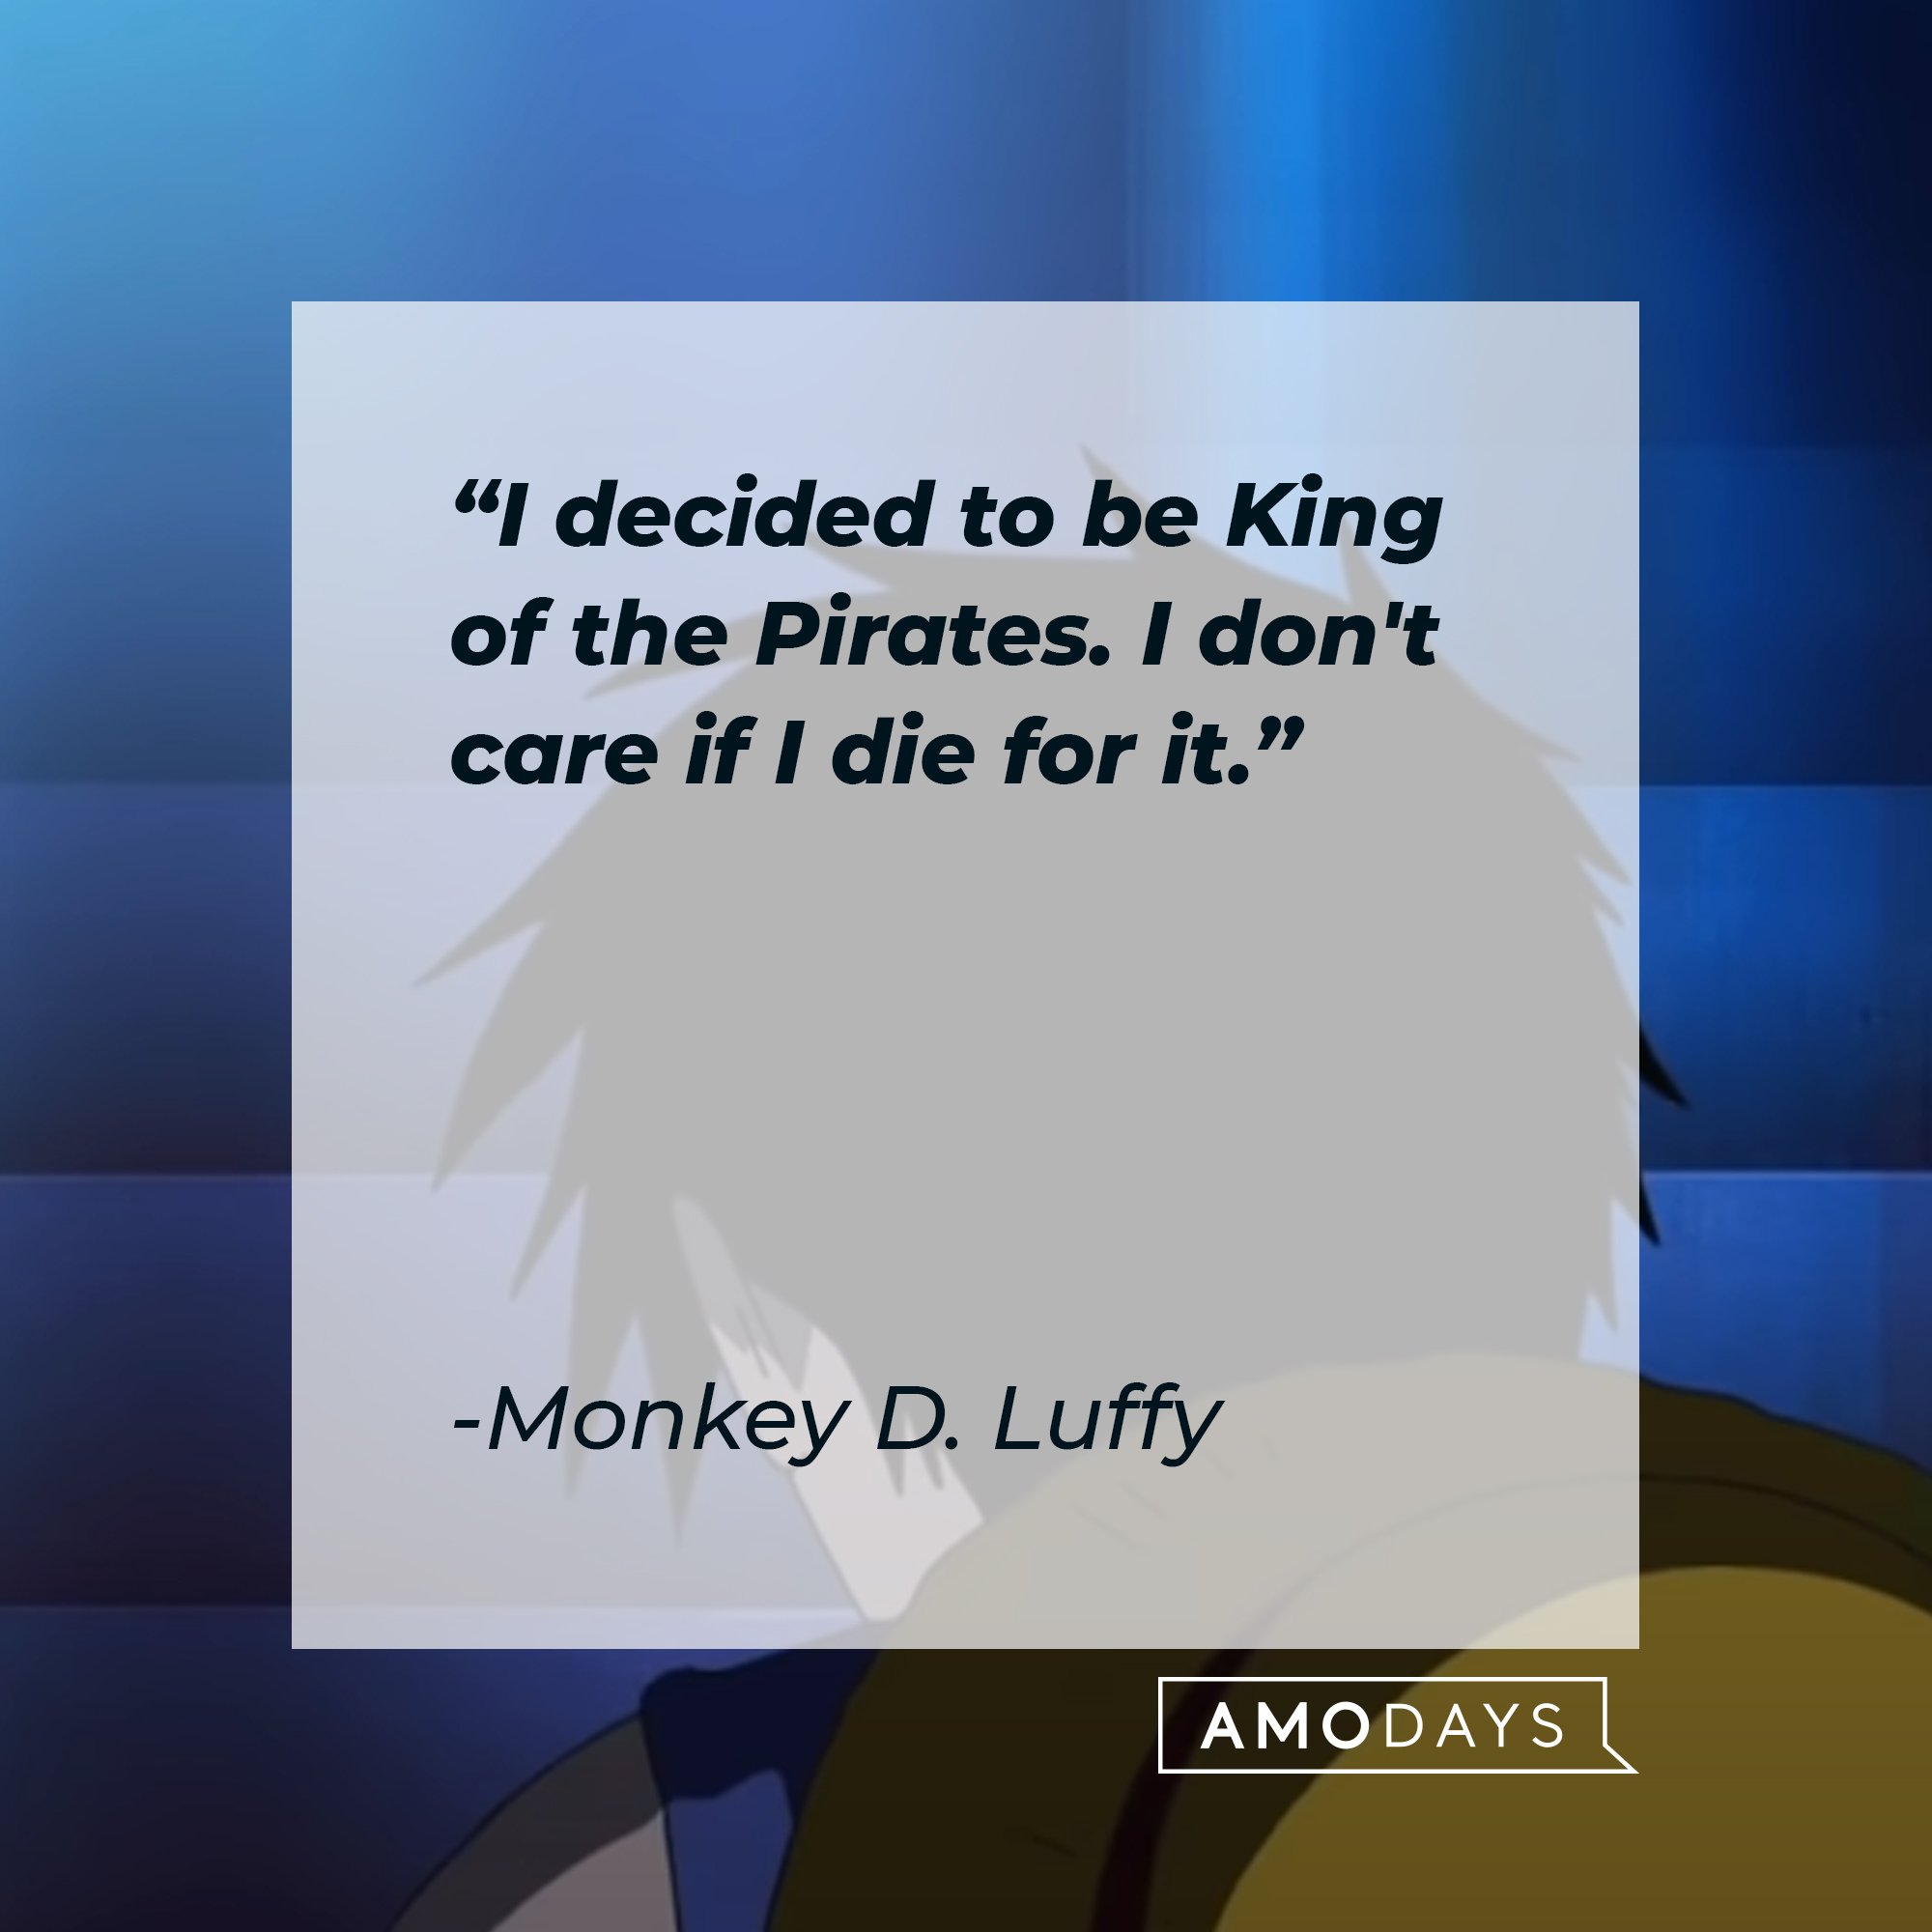 Monkey D. Luffy’s quote: "I decided to be King of the Pirates. I don't care if I die for it." | Image: AmoDays